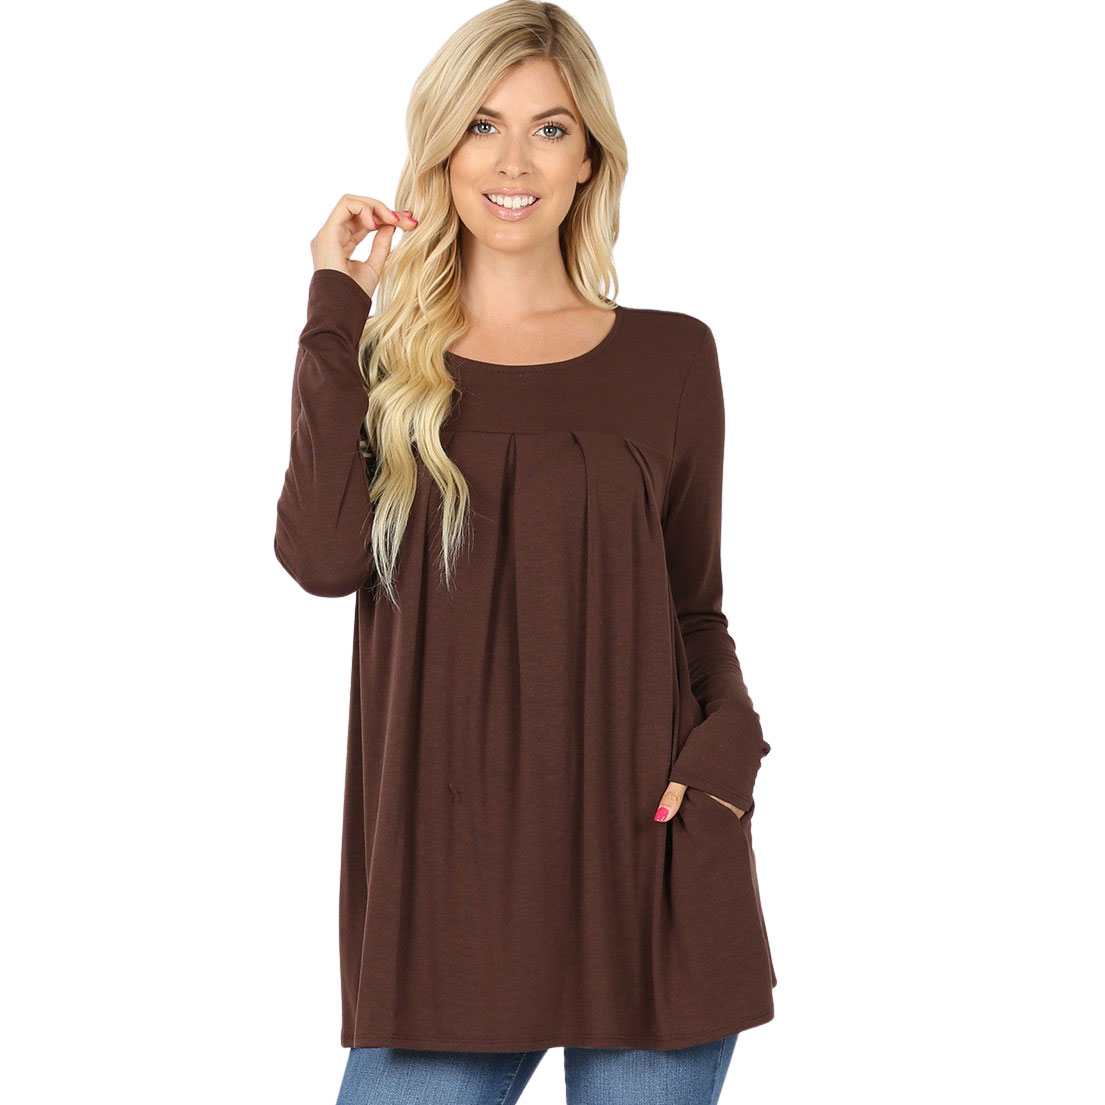 1658 - Long Sleeve Round Neck Pleated Tops ASH GREY Long Sleeve Round Neck Pleated 1658 - X-Large